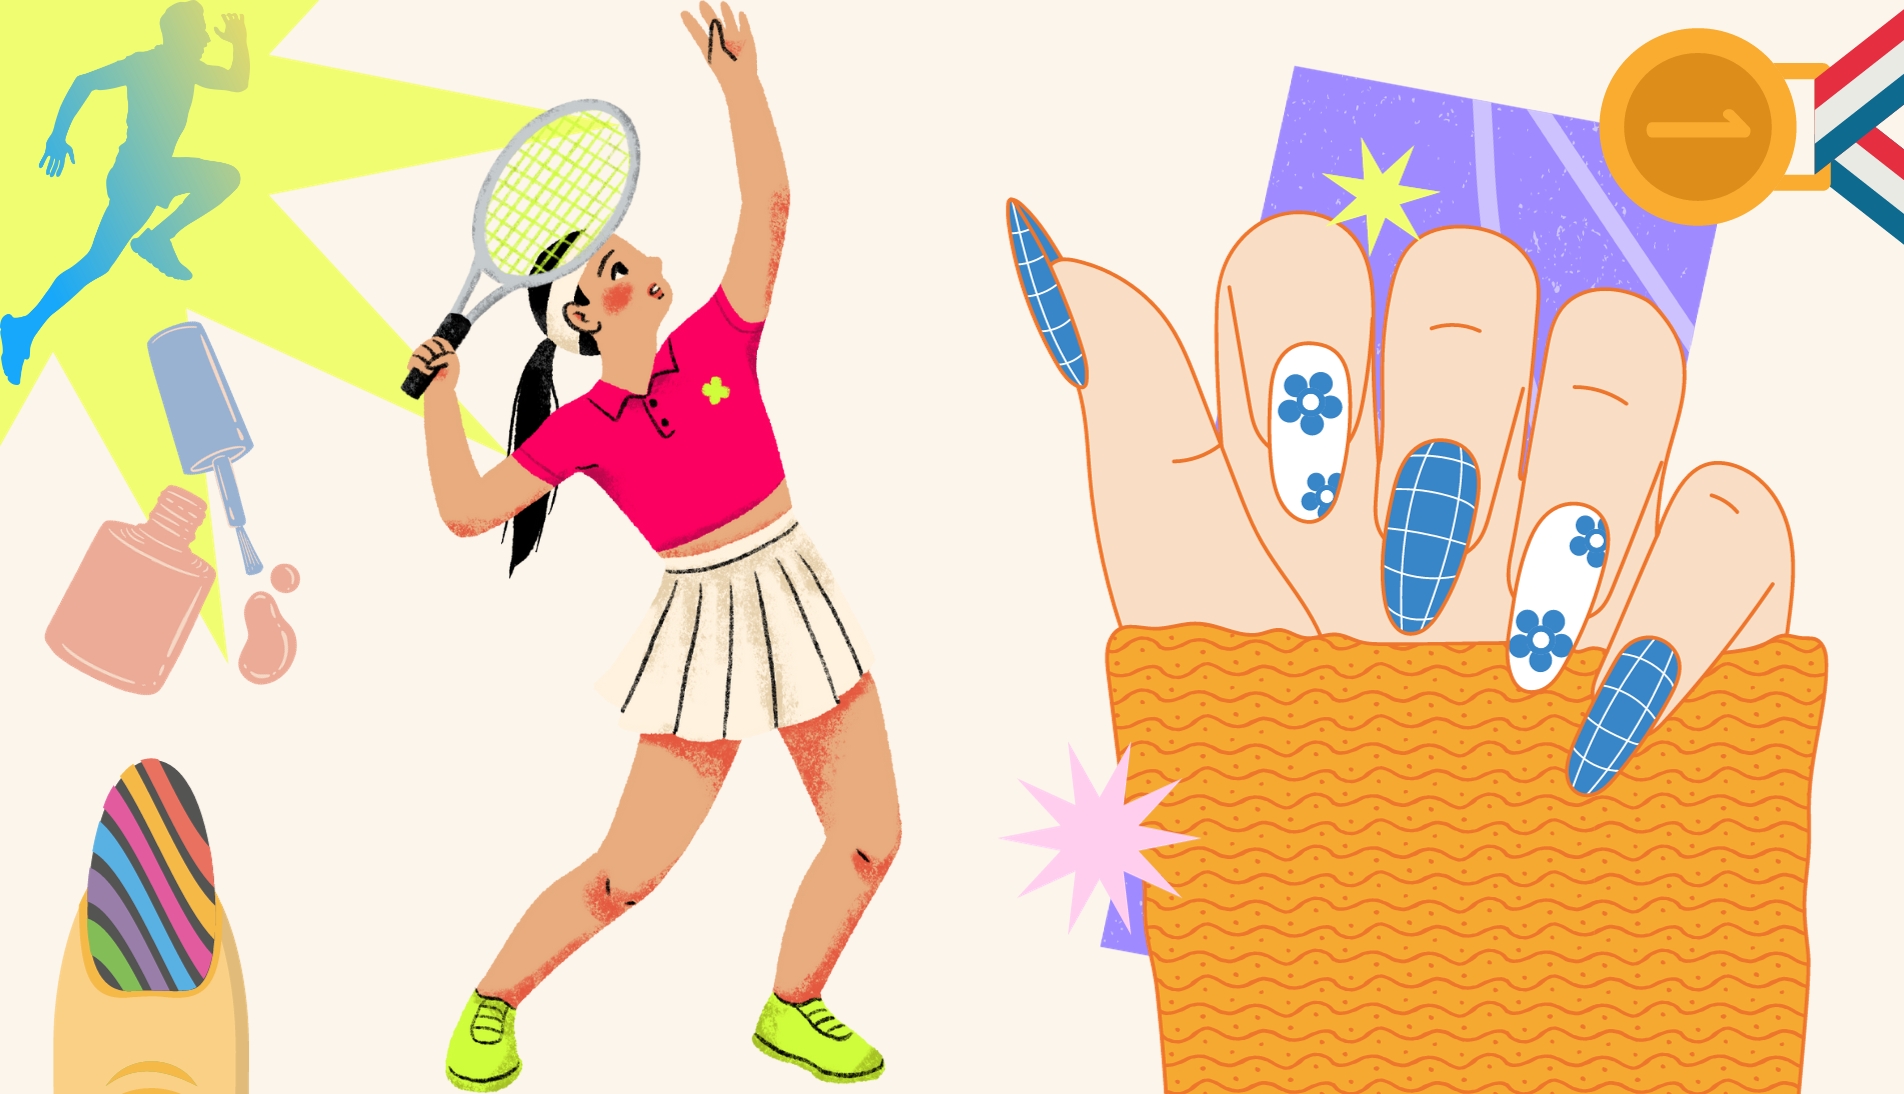 Illustration showcasing trendy nail art designs inspired by sports events.